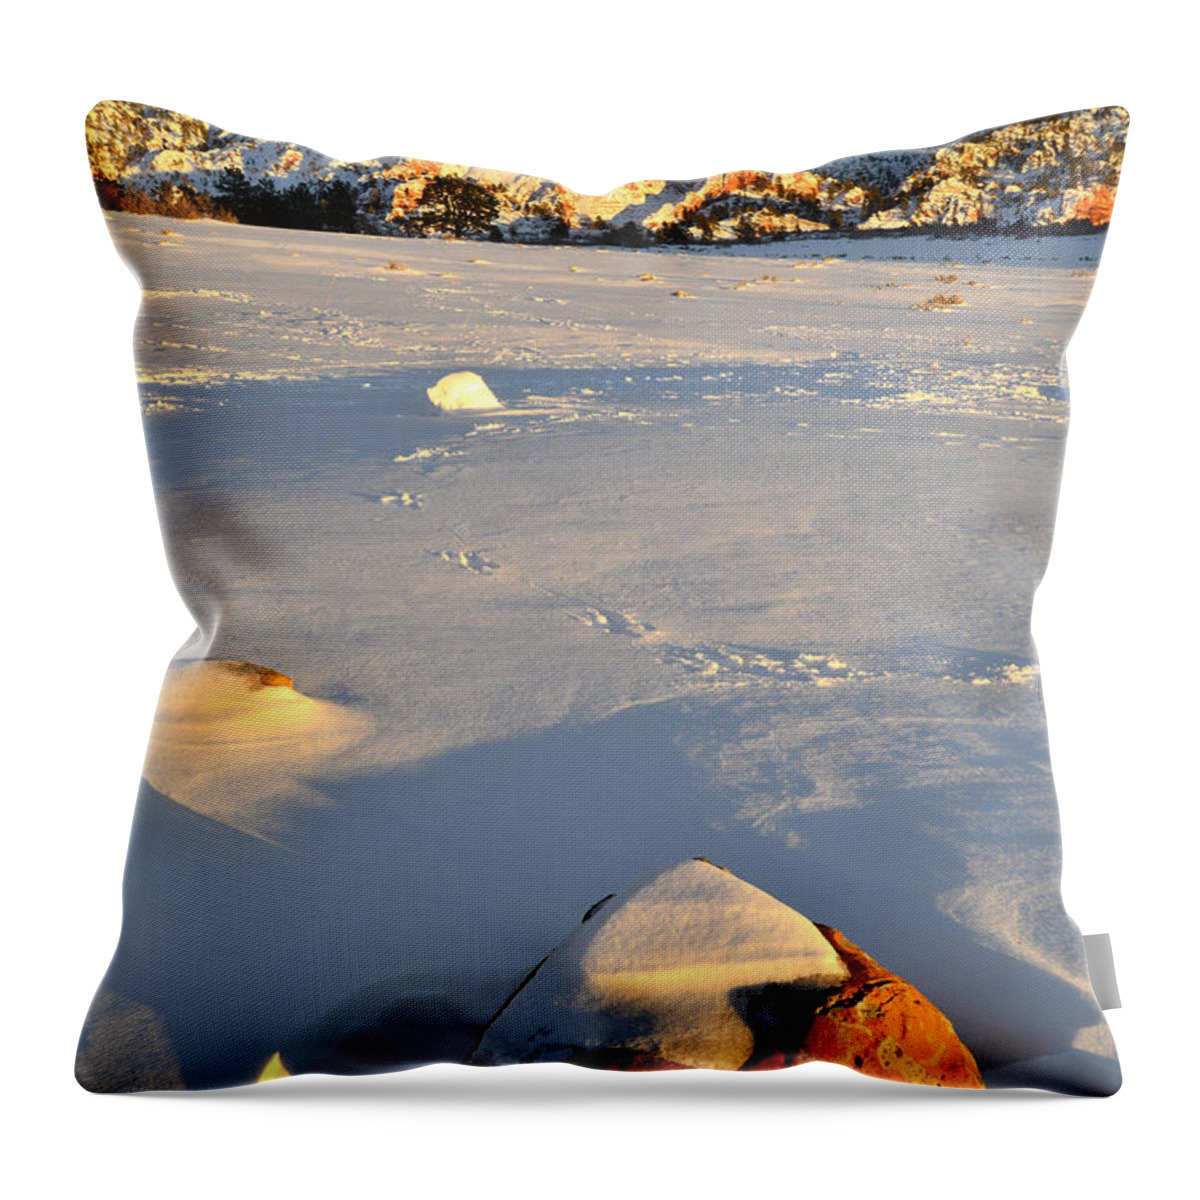 Zion National Park Throw Pillow featuring the photograph Kolob Terrace Road by Ray Mathis